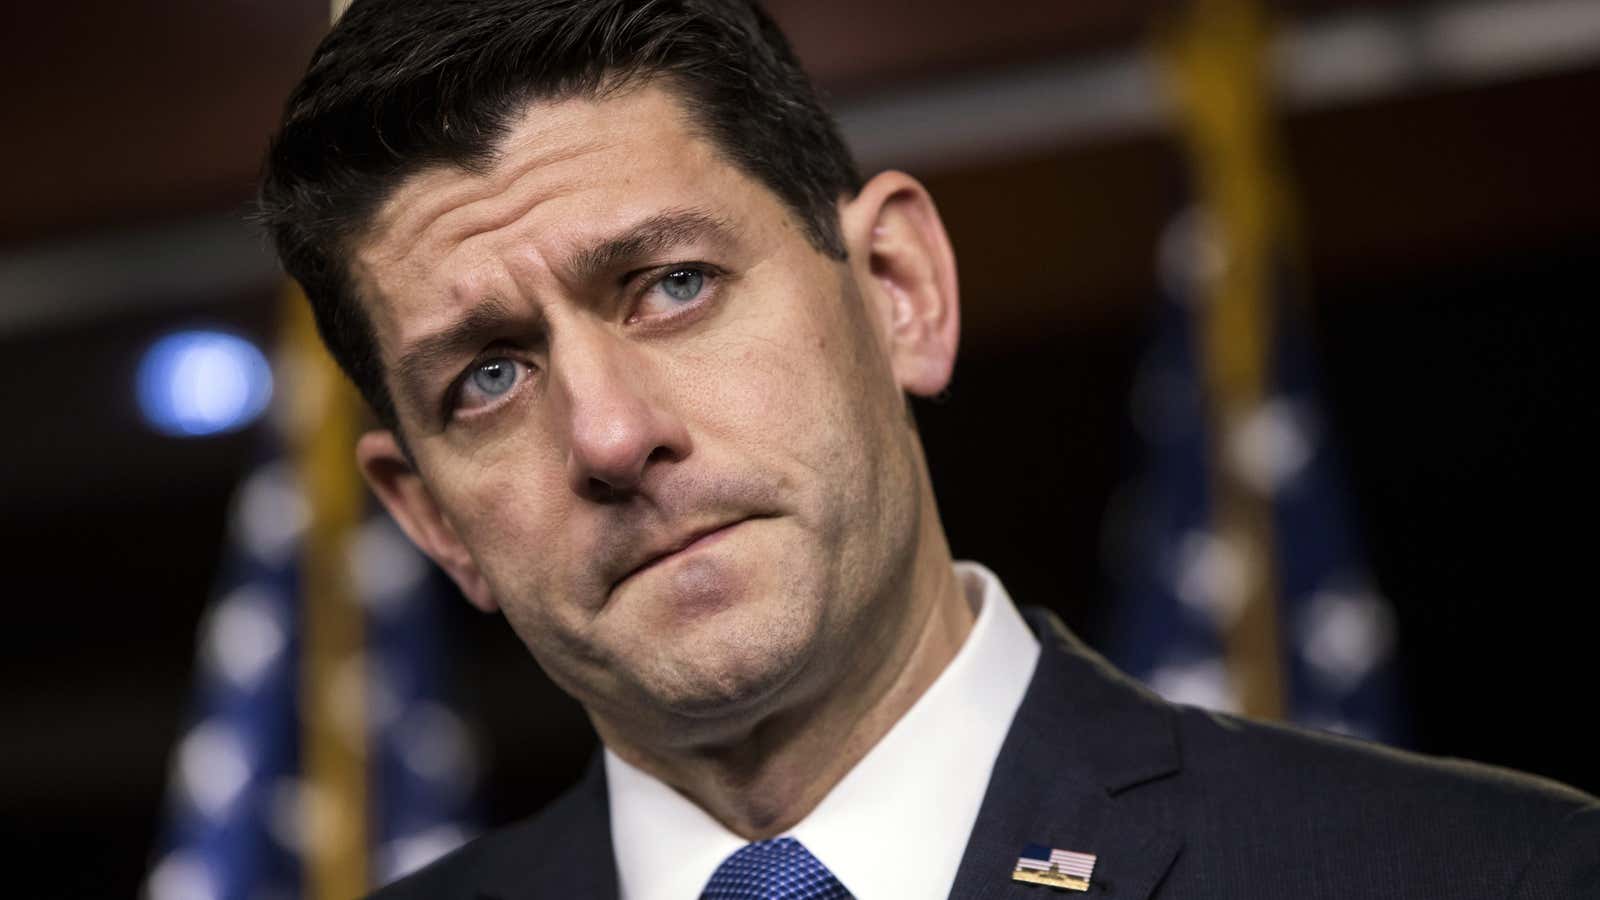 Paul Ryan says he has done his part for population growth. But, has he?